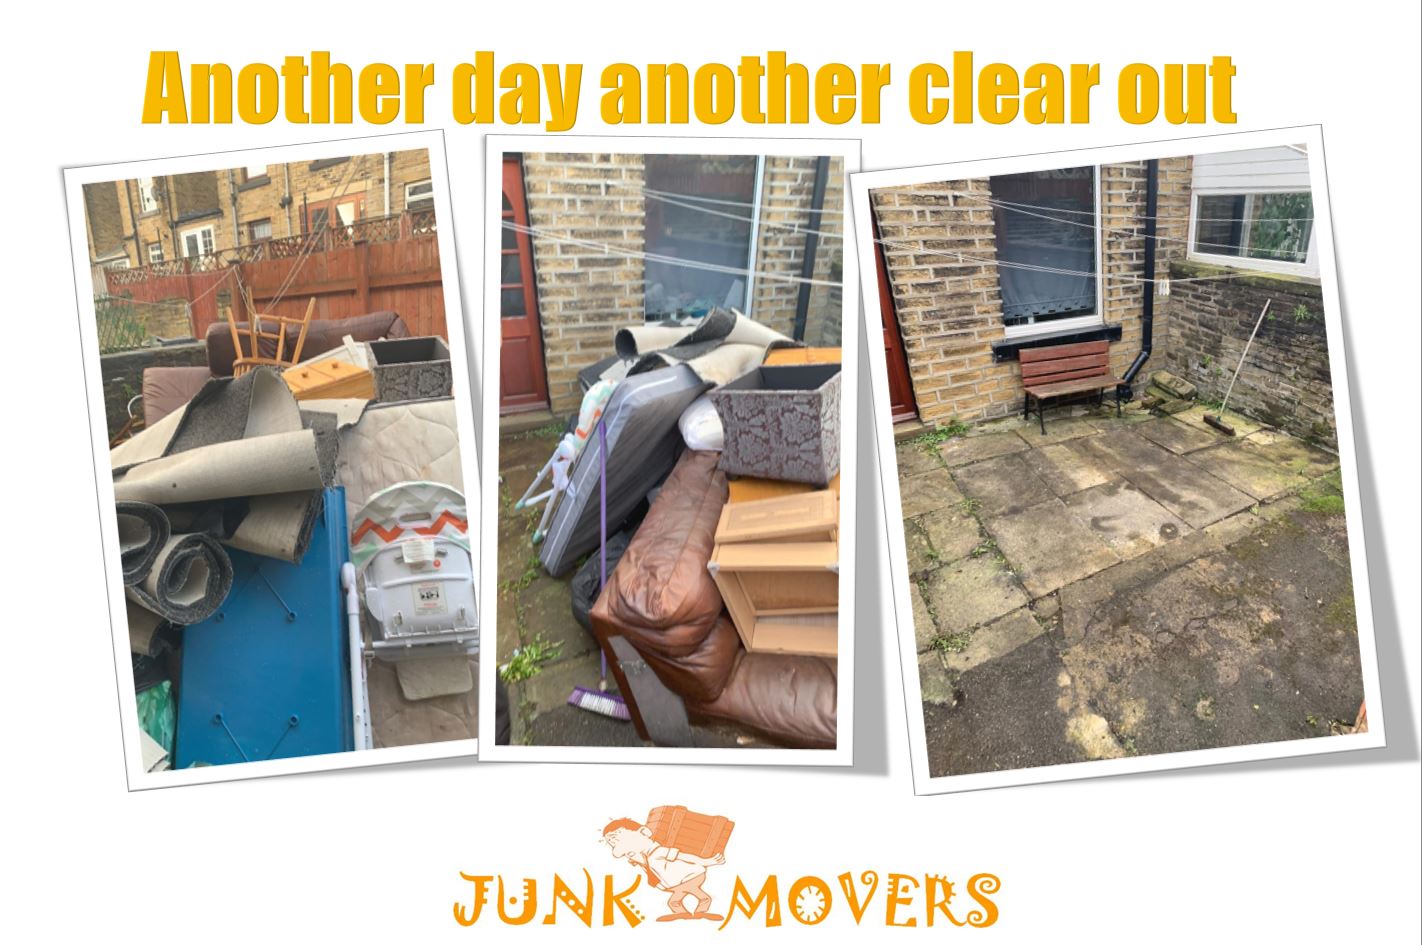 Junk Collections Barnsley, Junk Movers West Yorkshire Ltd